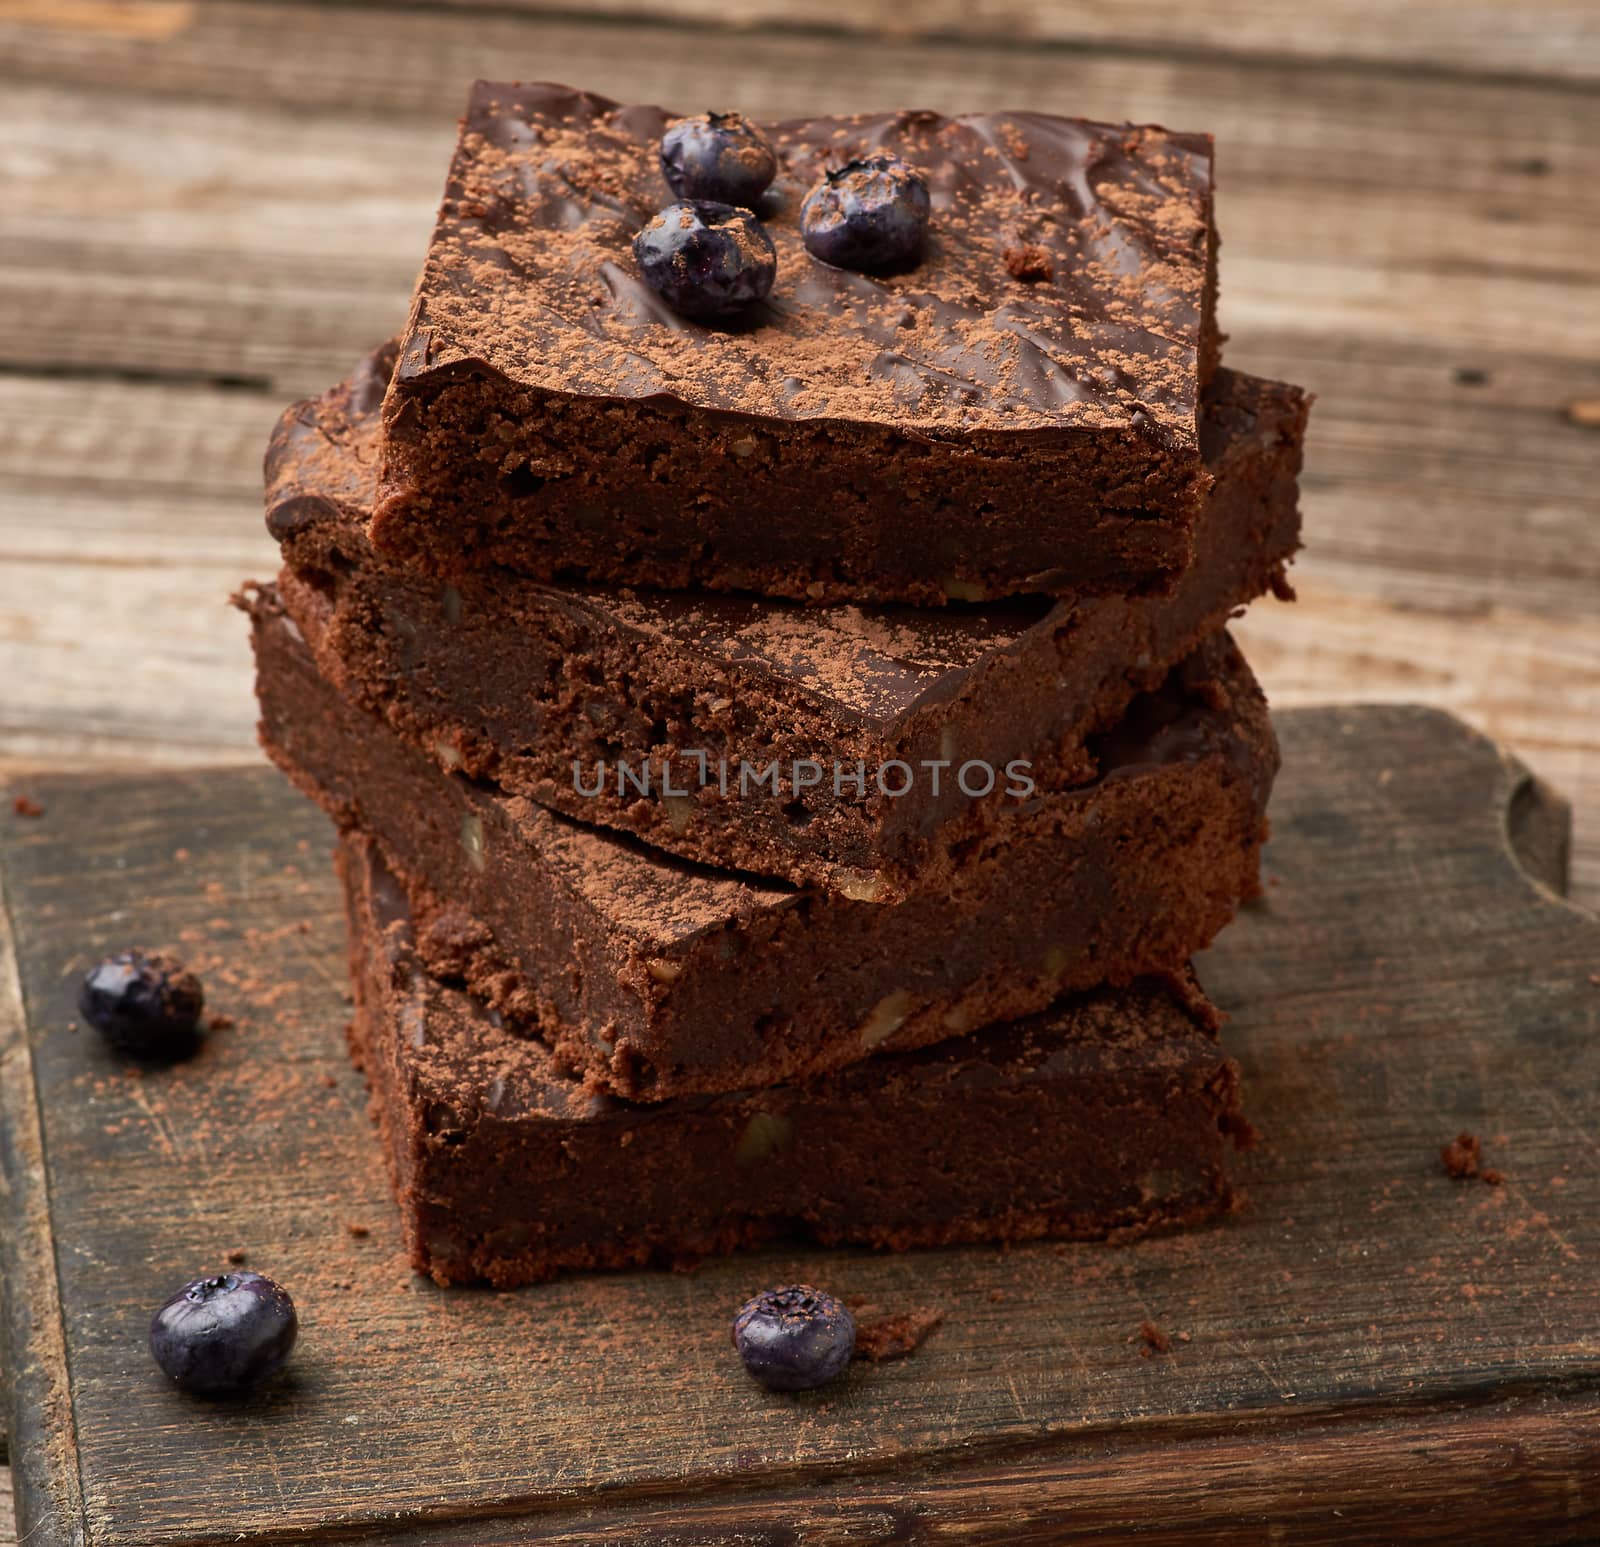 stack of square baked slices of brownie chocolate cake with walnuts on a wooden surface. Cooked homemade food. Chocolate pastry. Sweet meal, homemade dessert